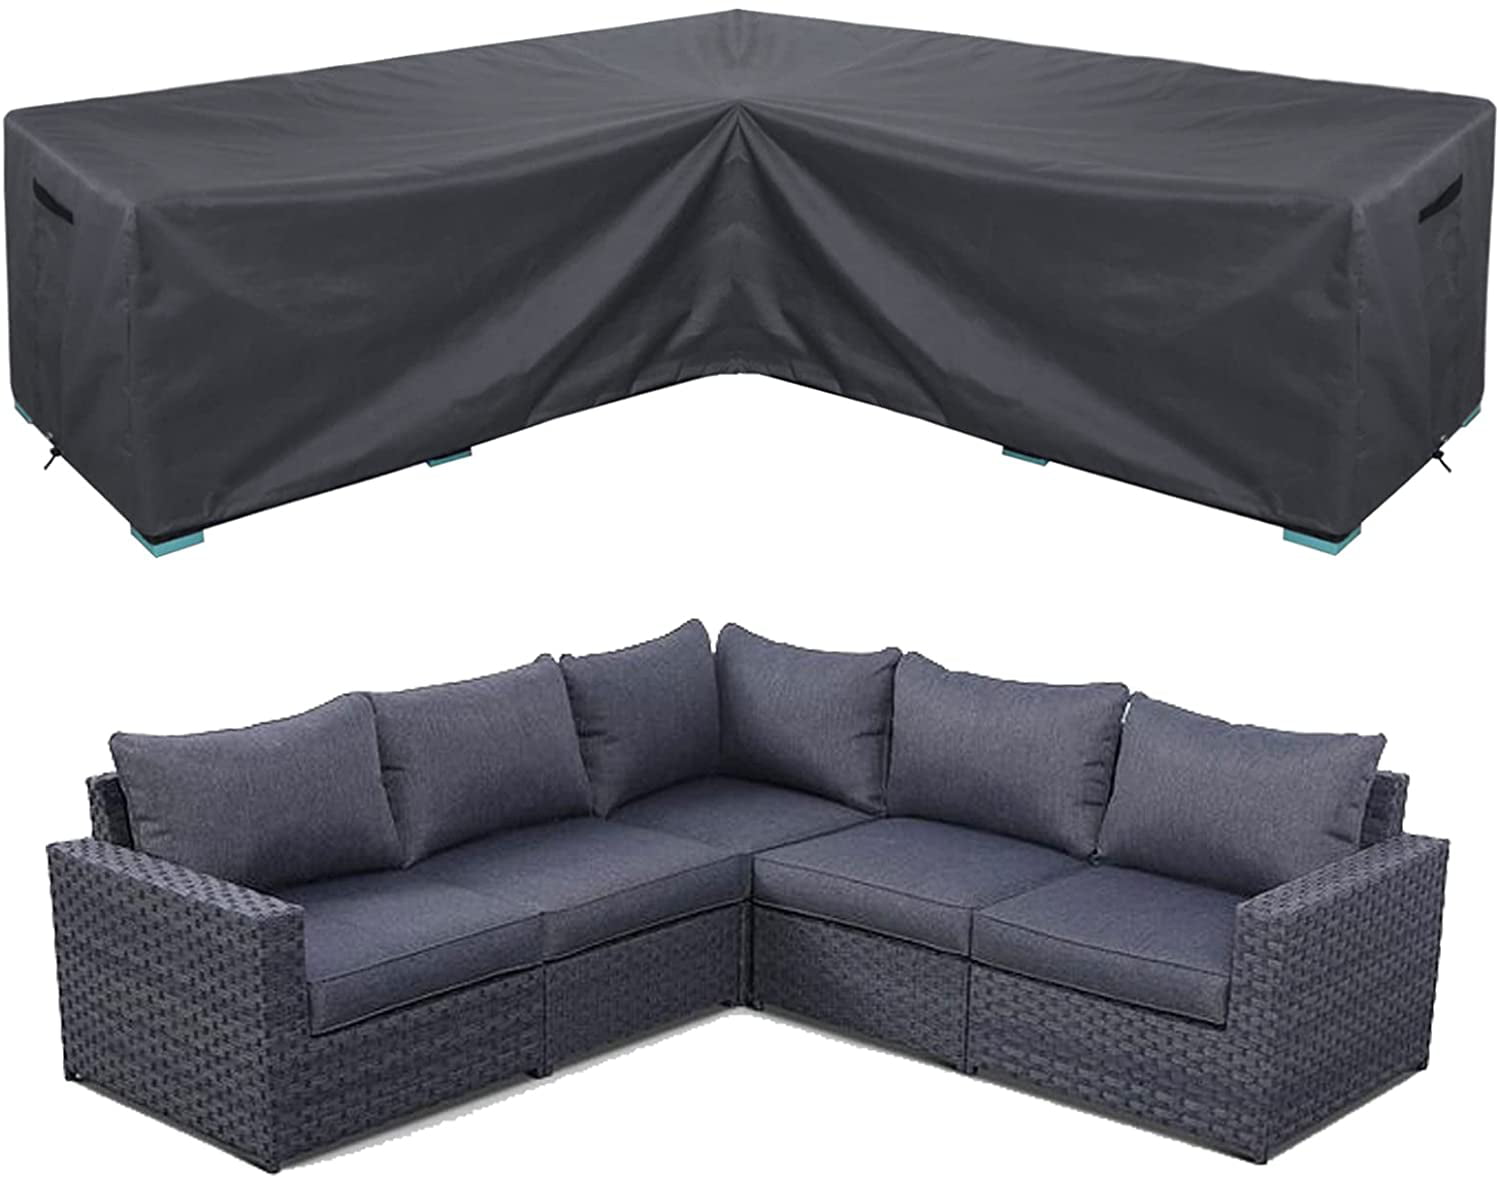 Rectangular 420D Heavy Duty Oxford Fabric Rattan Furniture Cover for Chair Sofa Outdoor 90x90x75cm Furniture Set Covers 35.4x35.4x29.5inch black